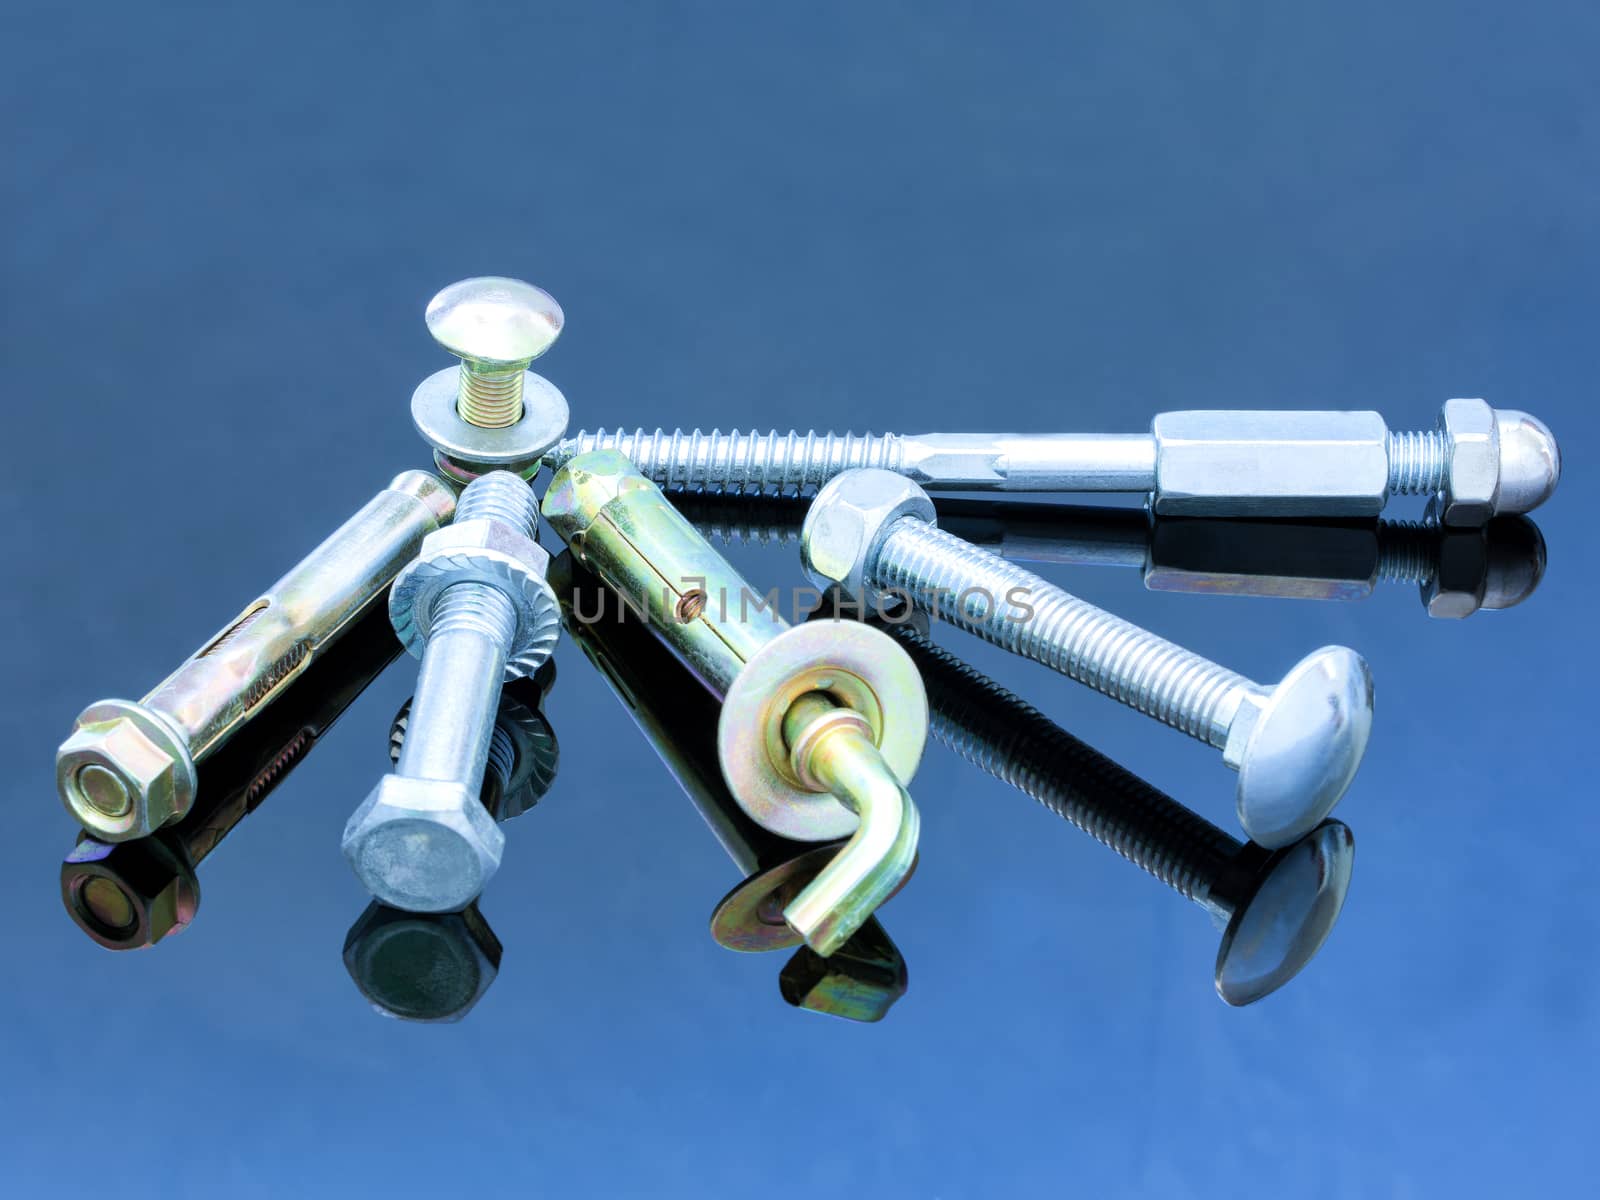 Screwbolts screw nuts, hanger and bolt washers on blue background construction concept. by Sergii